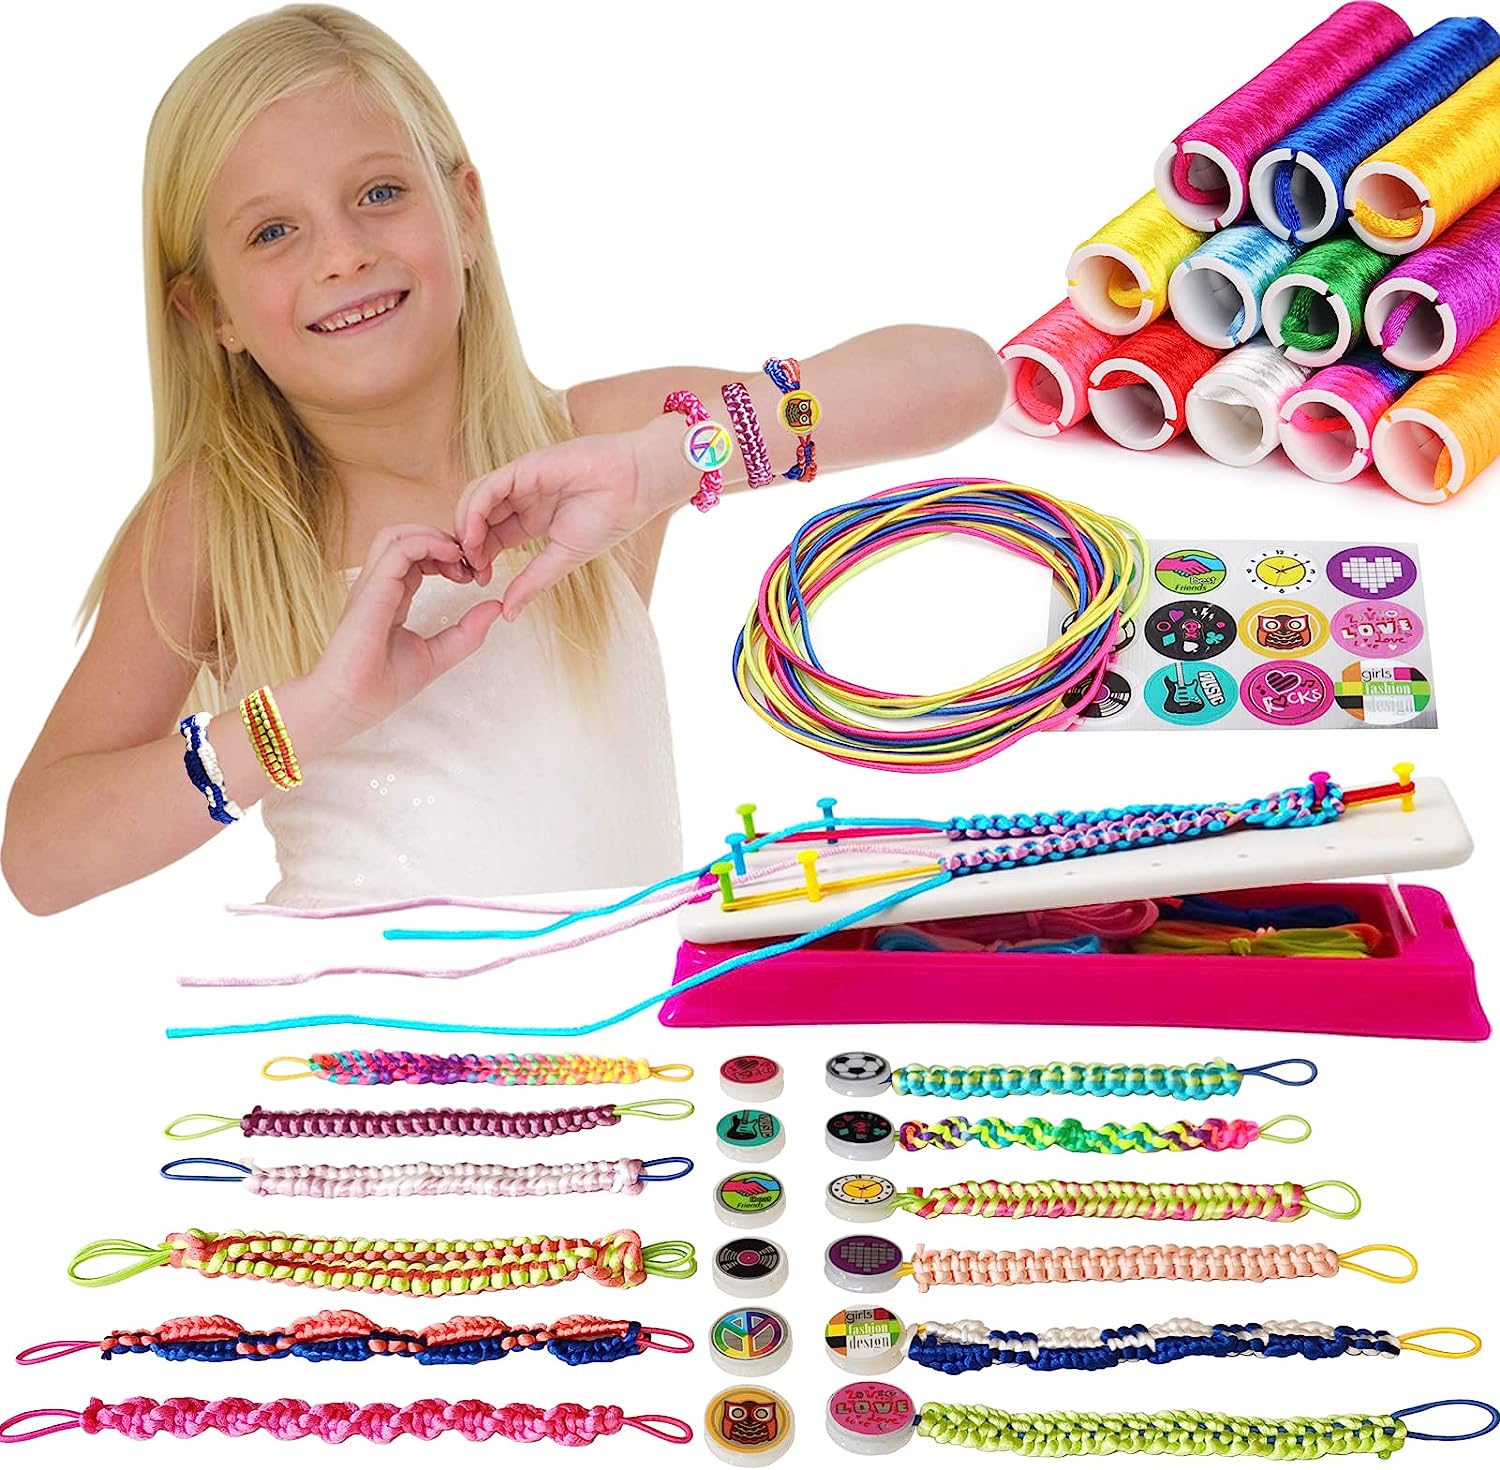 Friendship Girls Bracelet Making Kit - DIY Bracelet Kits Kids Toys Girls  Gifts Ideas Ages 6 7 8 9 10 11 12 Year Old Birthday Present for Teen Girl  Arts and Crafts String Maker Tool Travel Activity Set : Toys & Games 